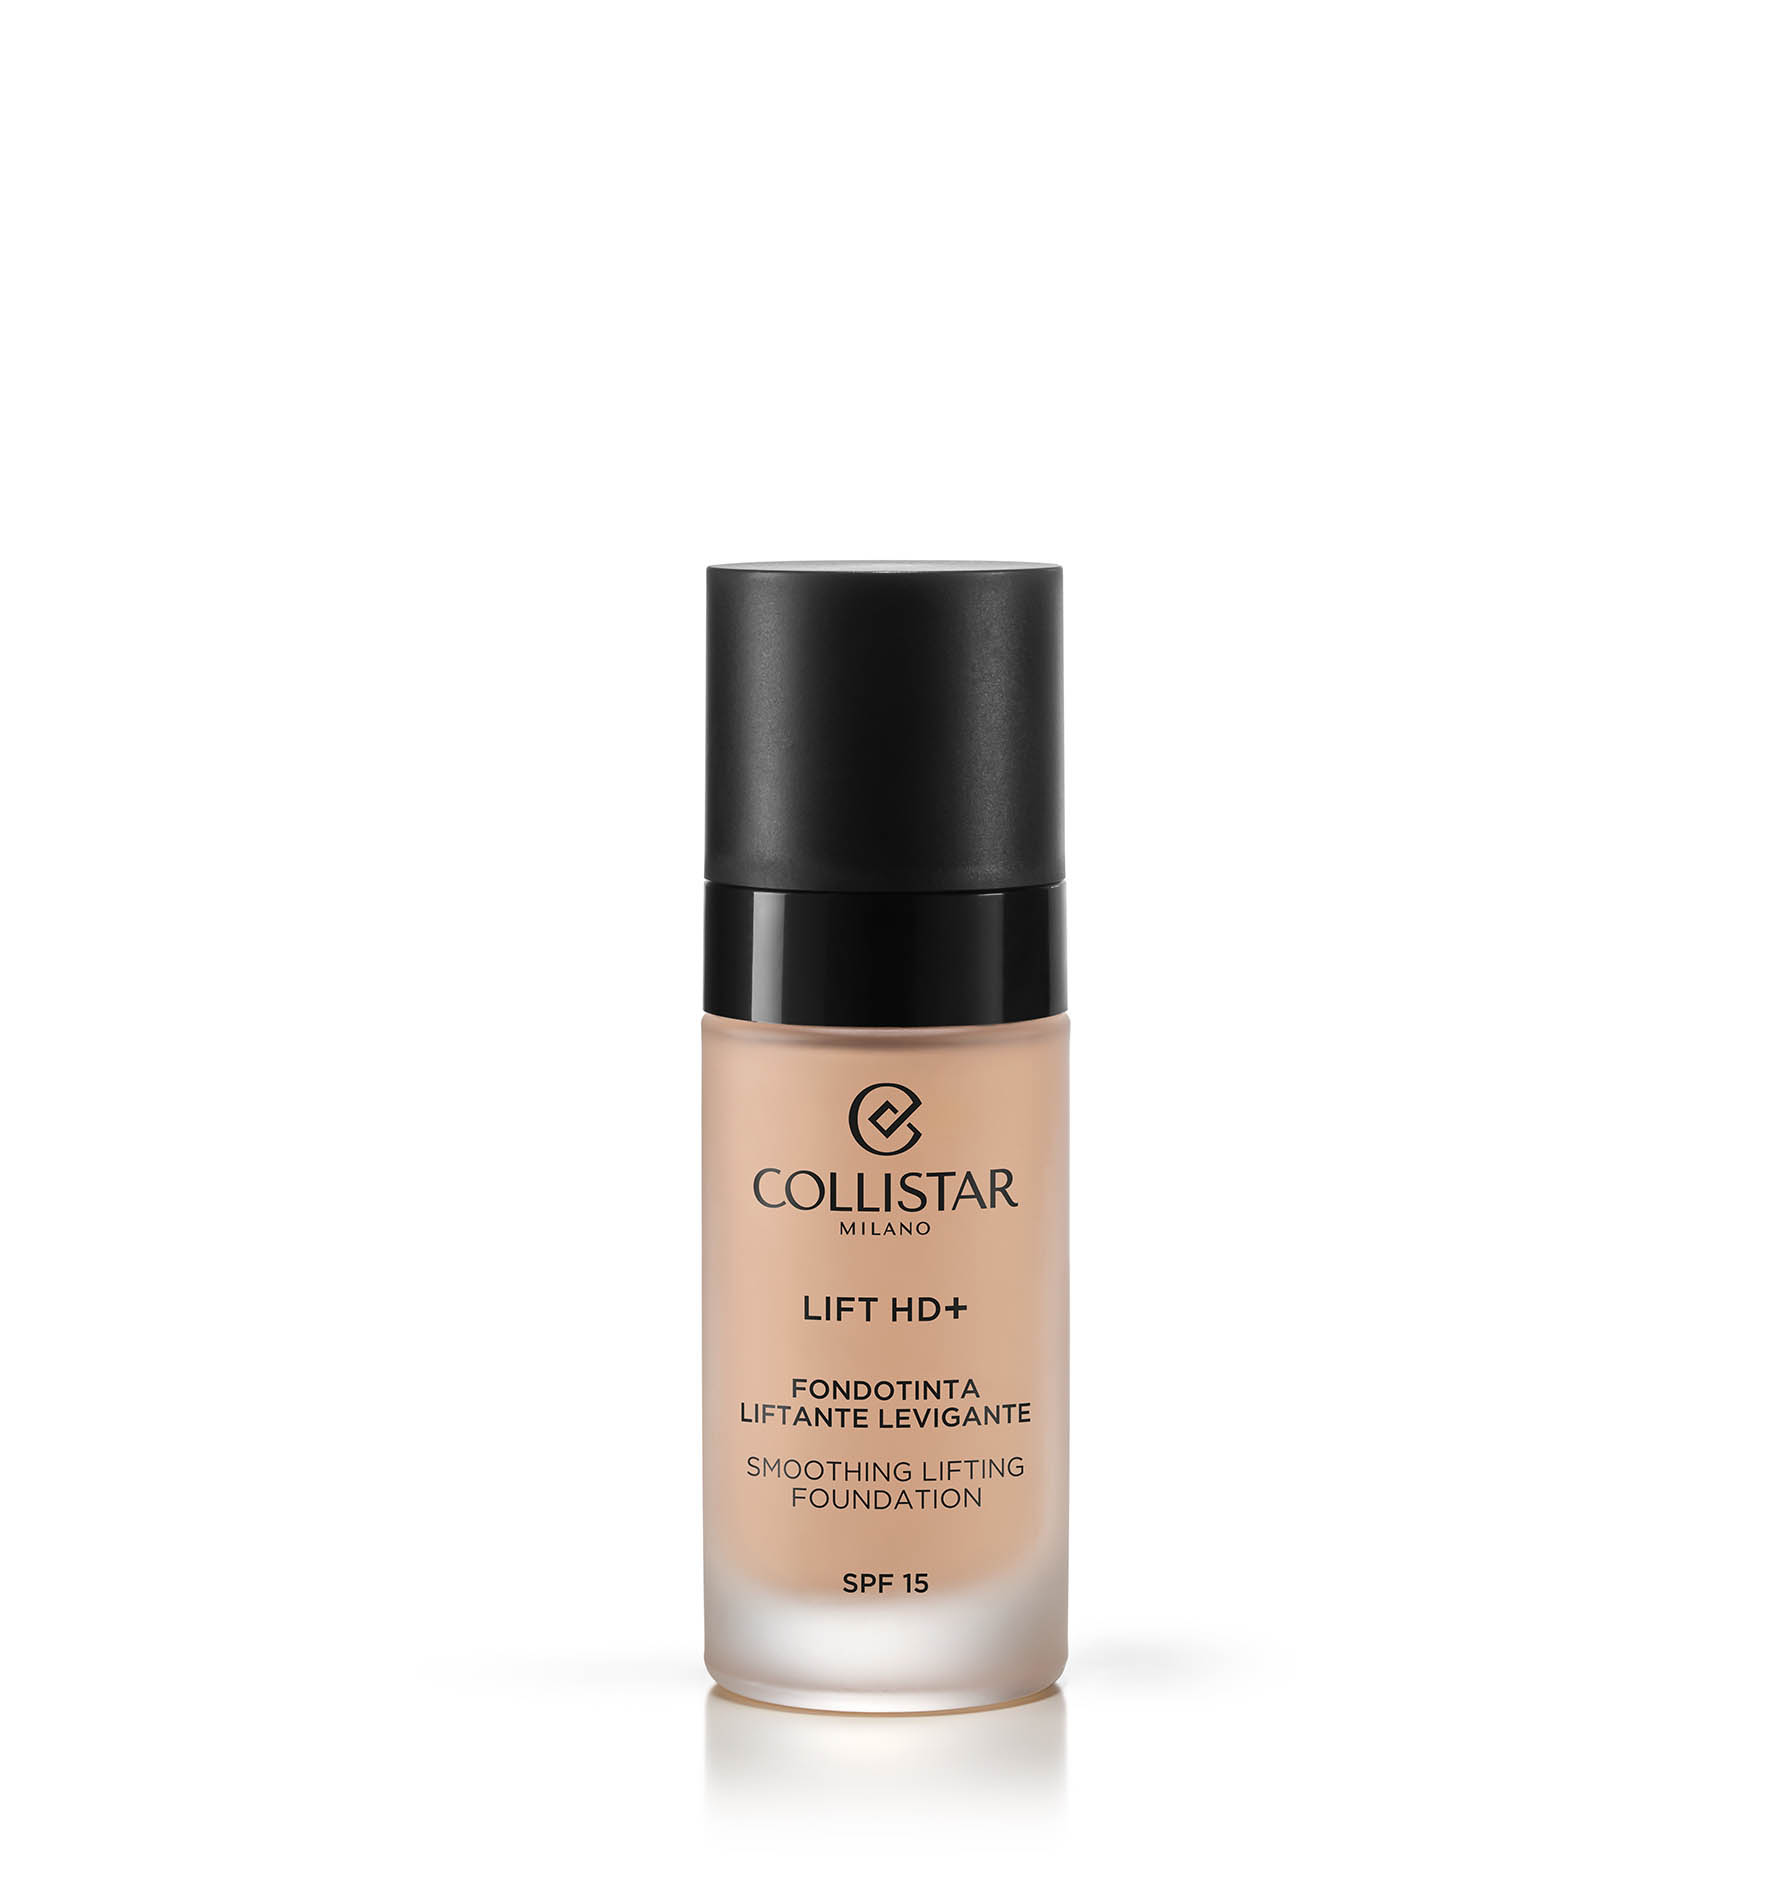 LIFT HD+ SMOOTHING LIFTING FOUNDATION - GEZICHT | Collistar - Shop Online Ufficiale